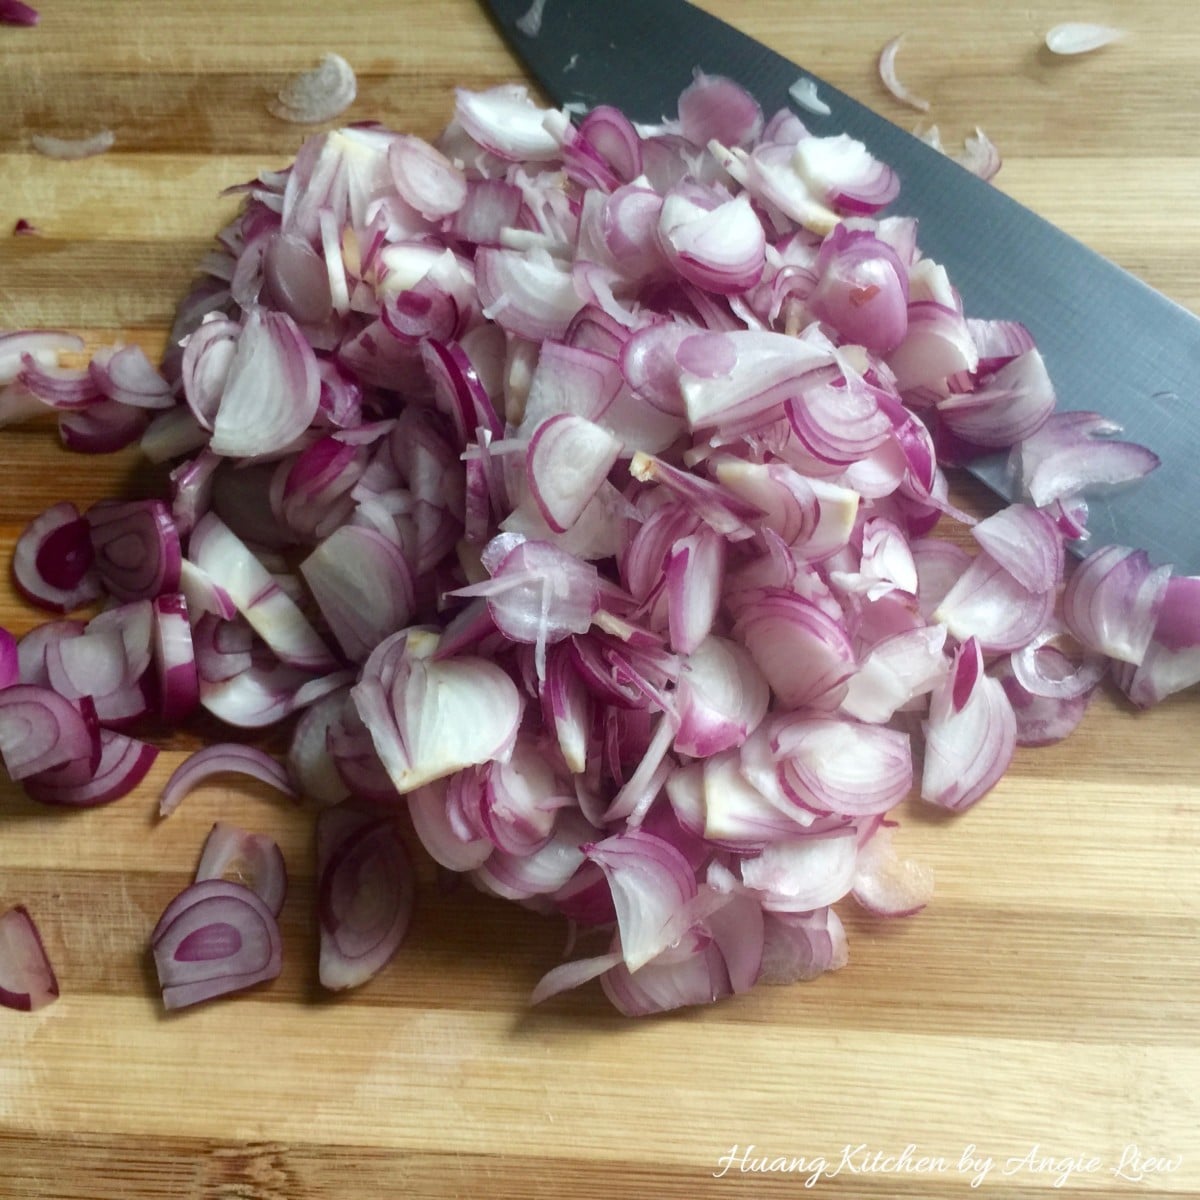 Slice thinly the shallots.